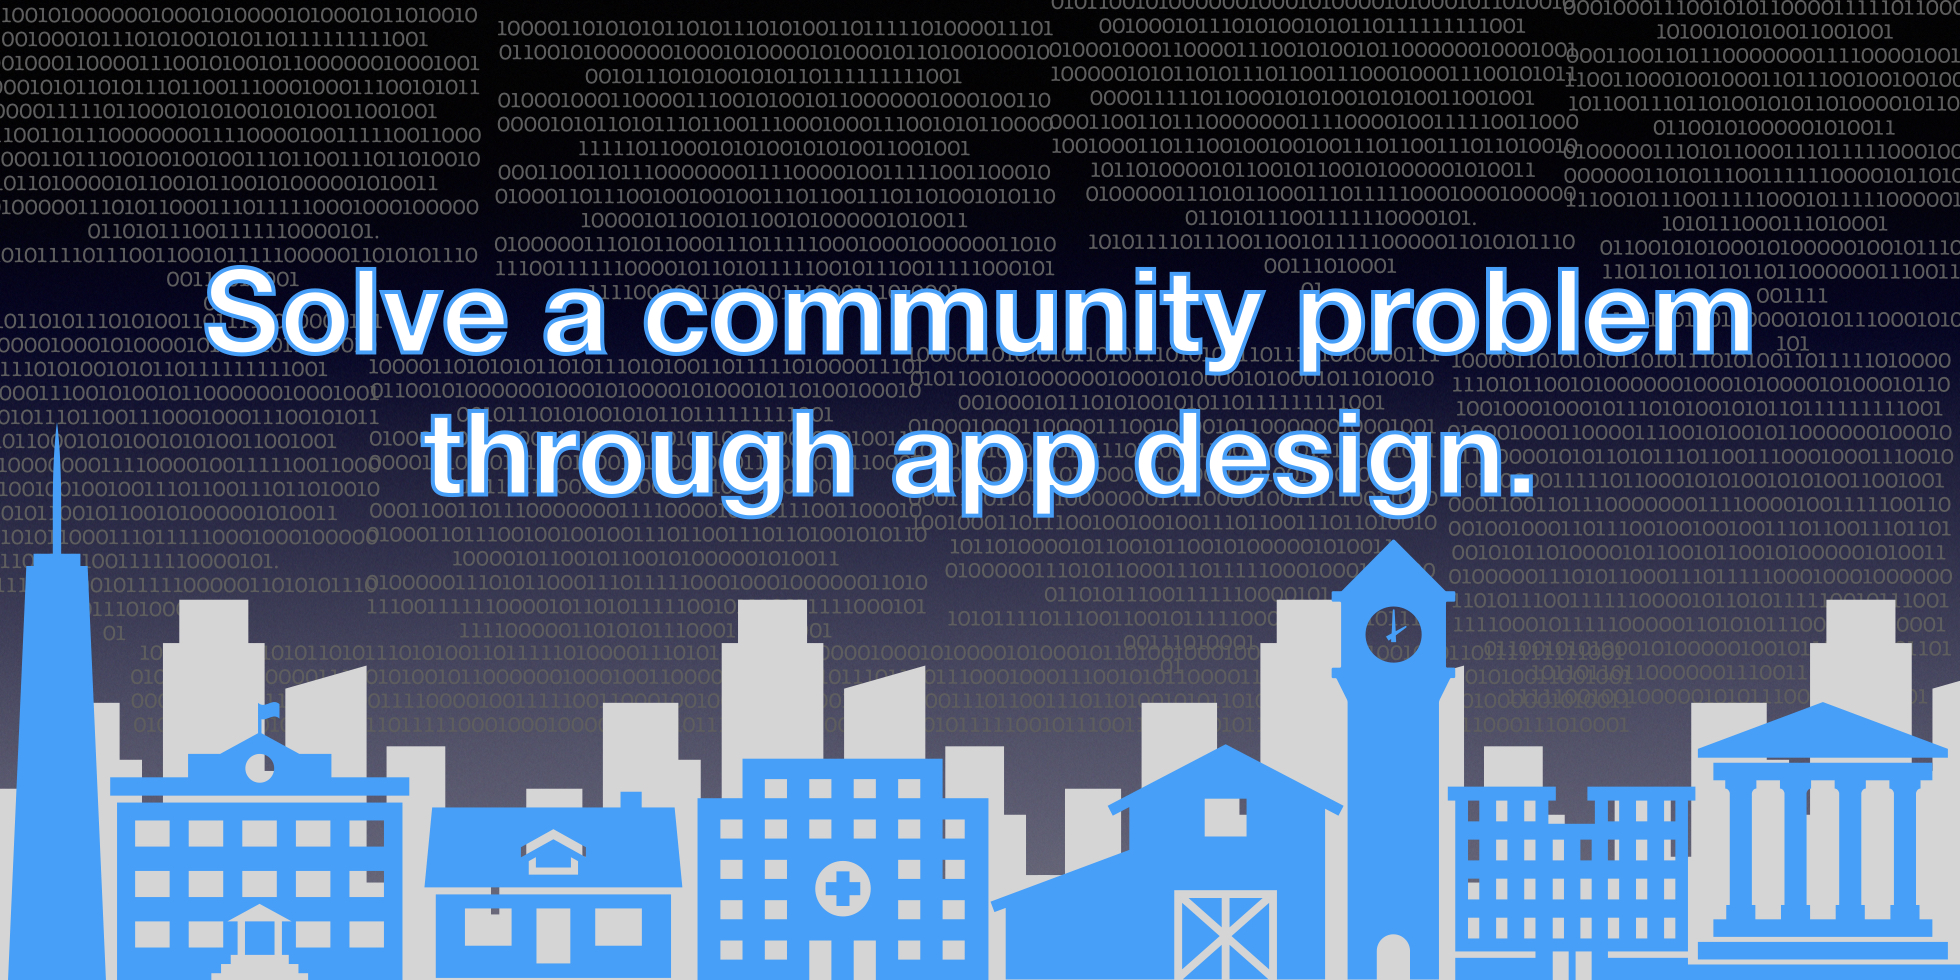 Text "Solve a community problem through app design" positioned on top of a dark background with shapes of a blue cityscape.